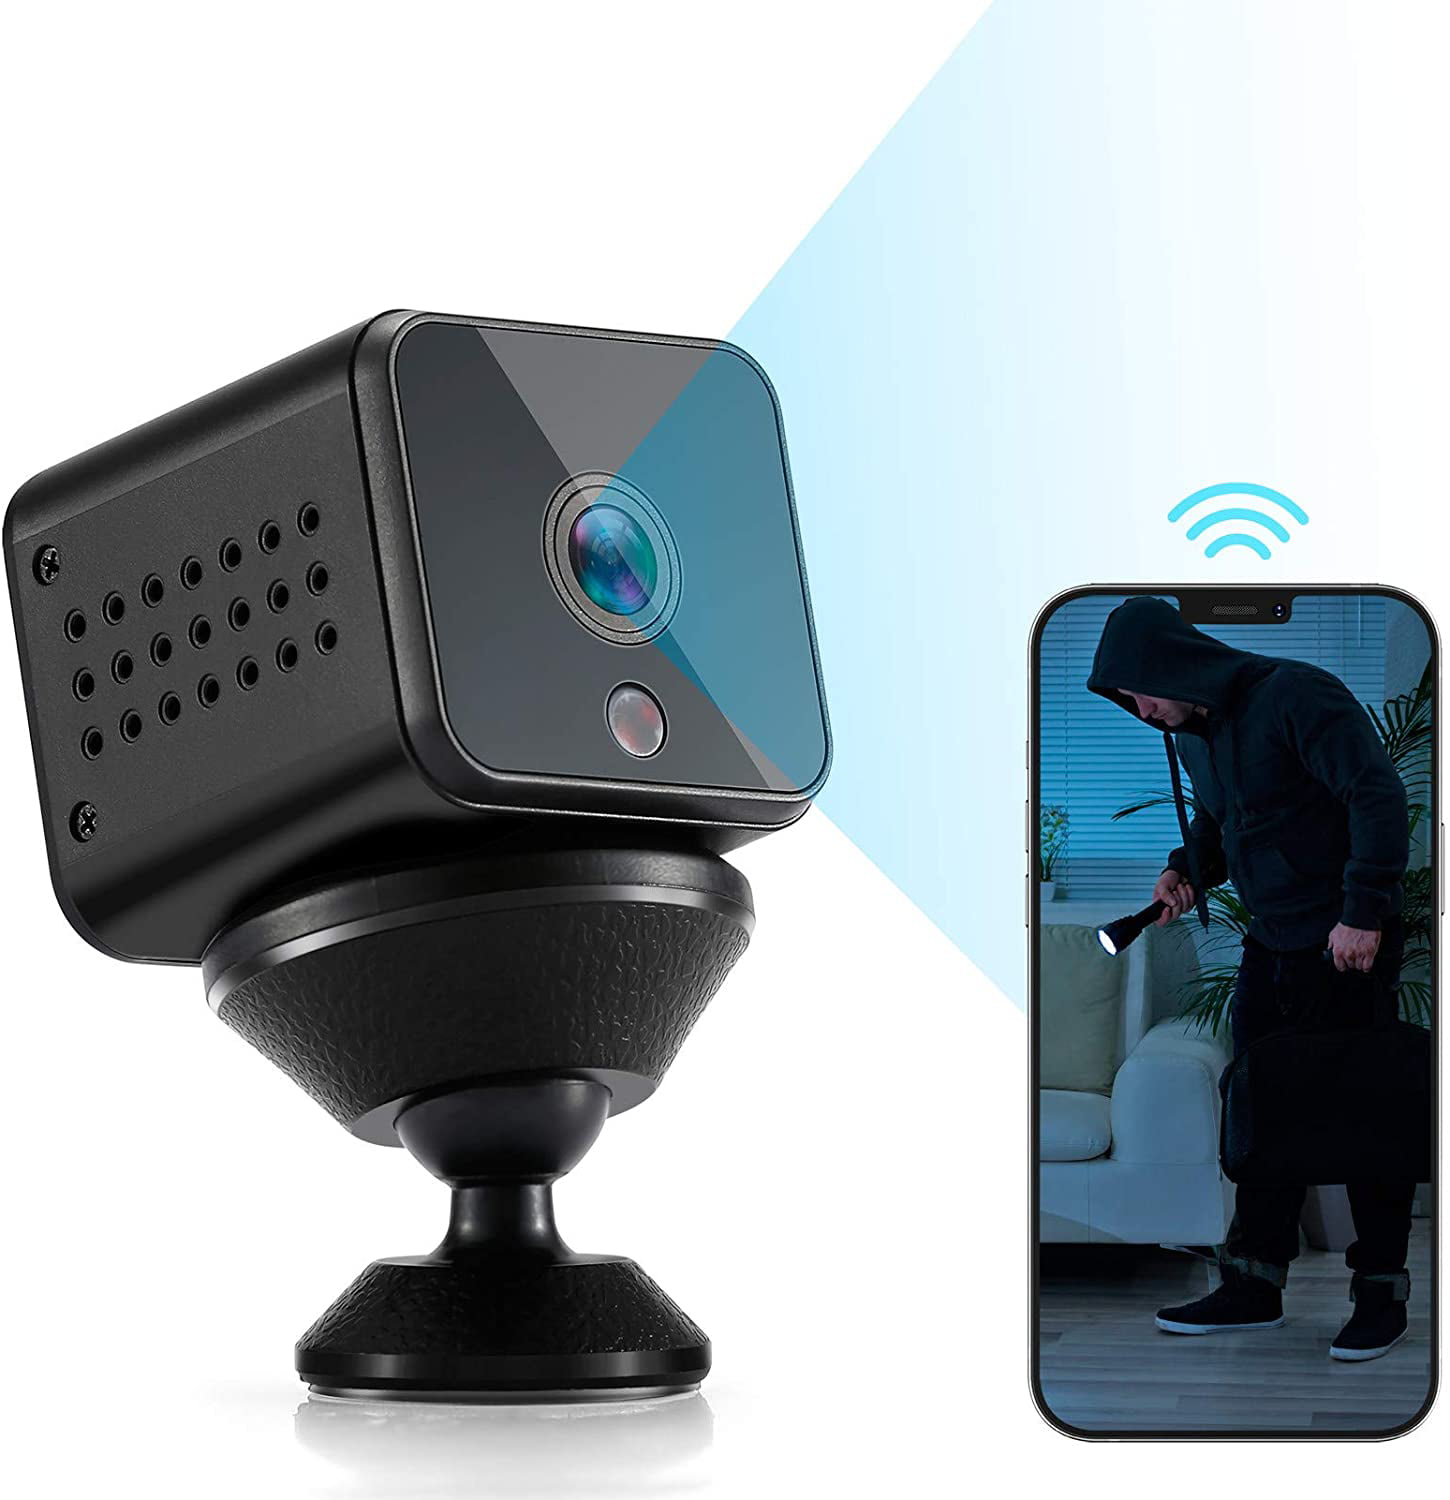 Pikooo Mini Spy Camera Hidden Nanny Camera with Night Vision and Motion Detection 1080p HD Recording Hidden Security for Home or Business No WiFi Required Wireless for Indoor Outdoor Use 